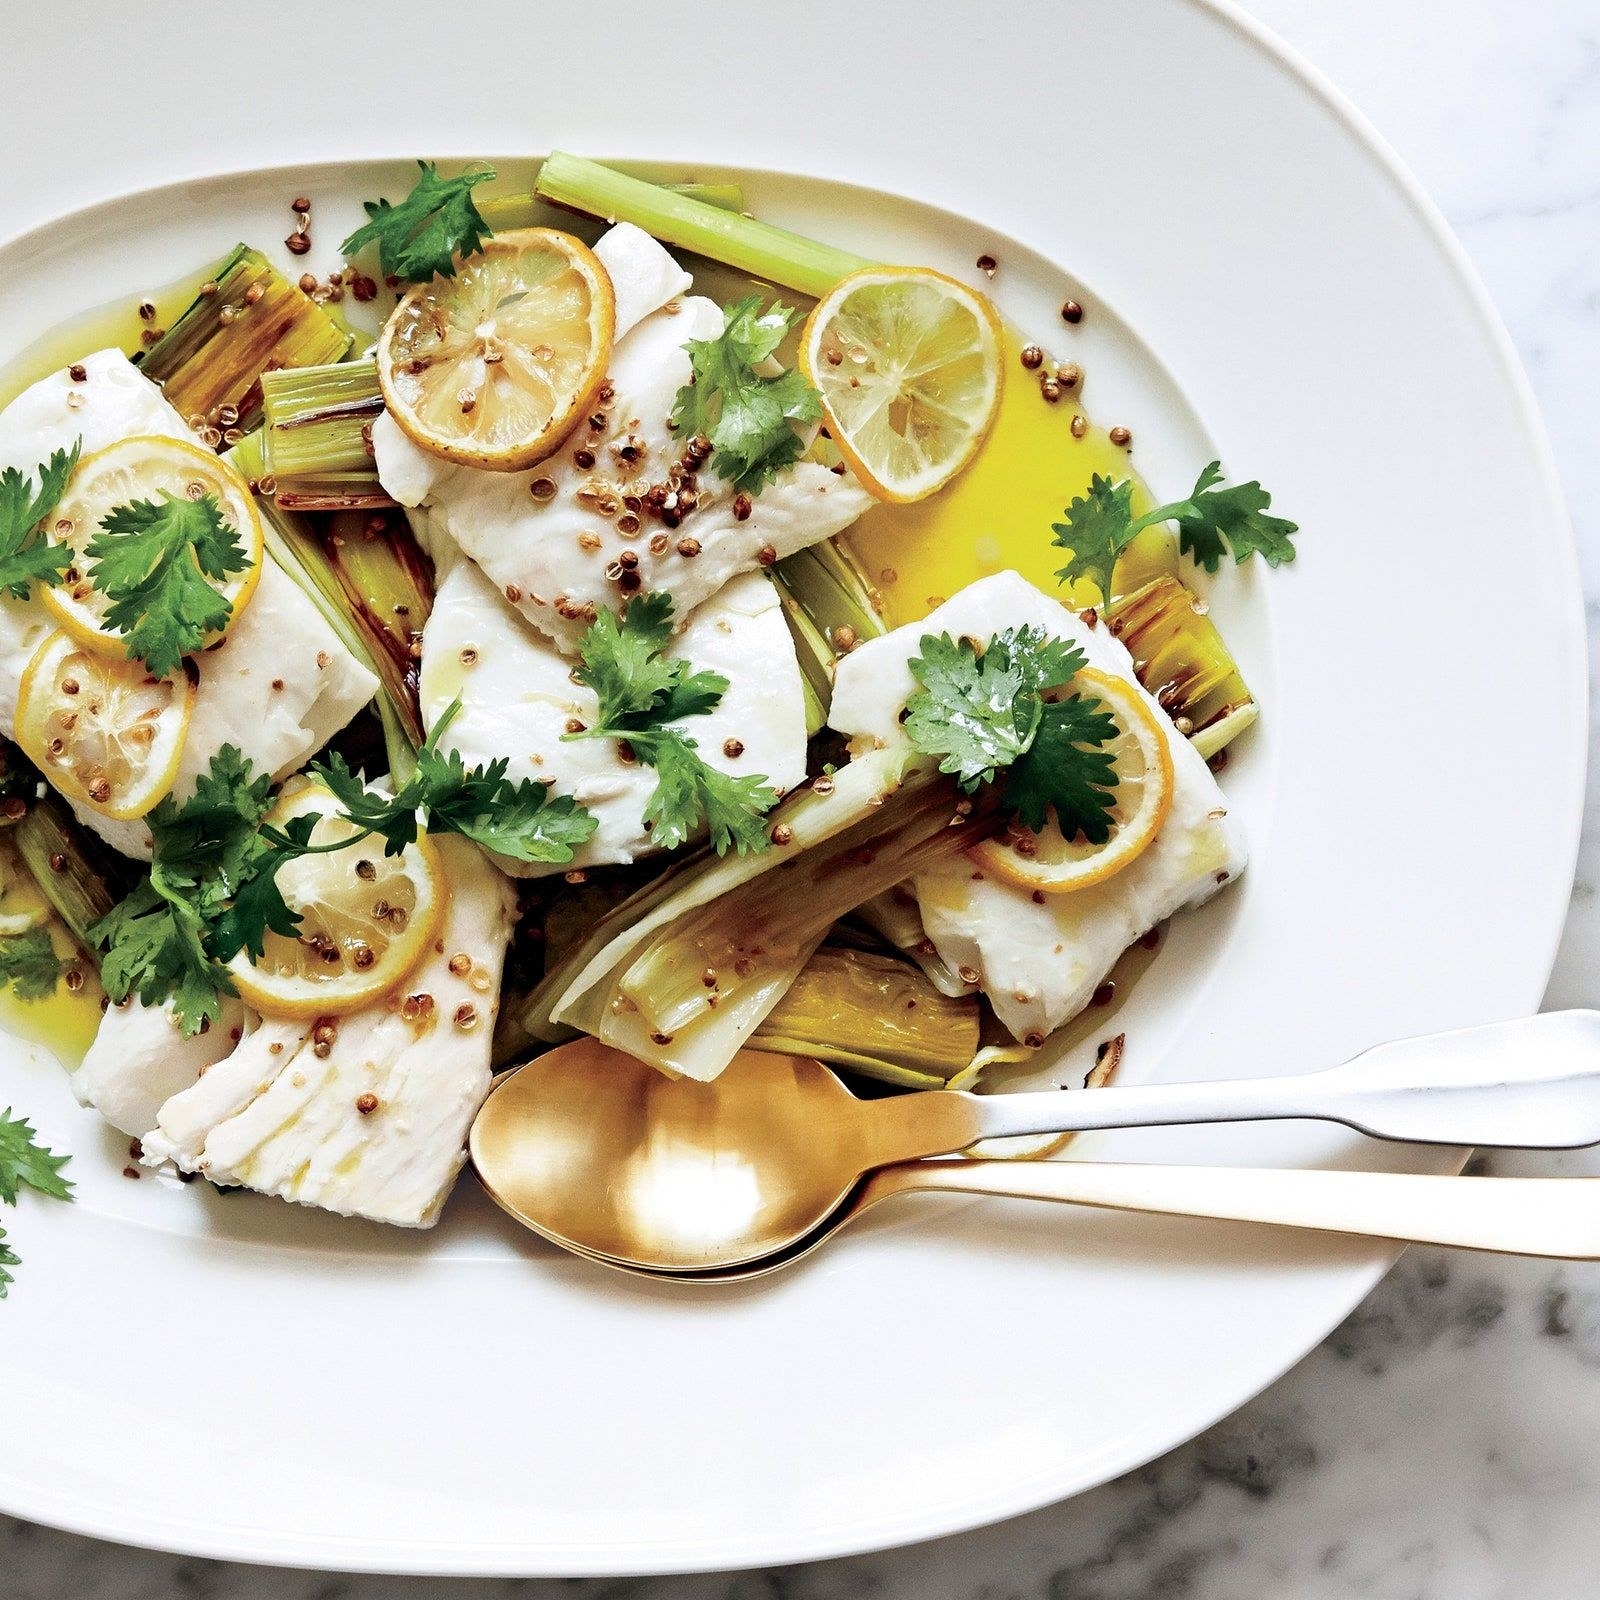 Halibut with leeks and herbs.